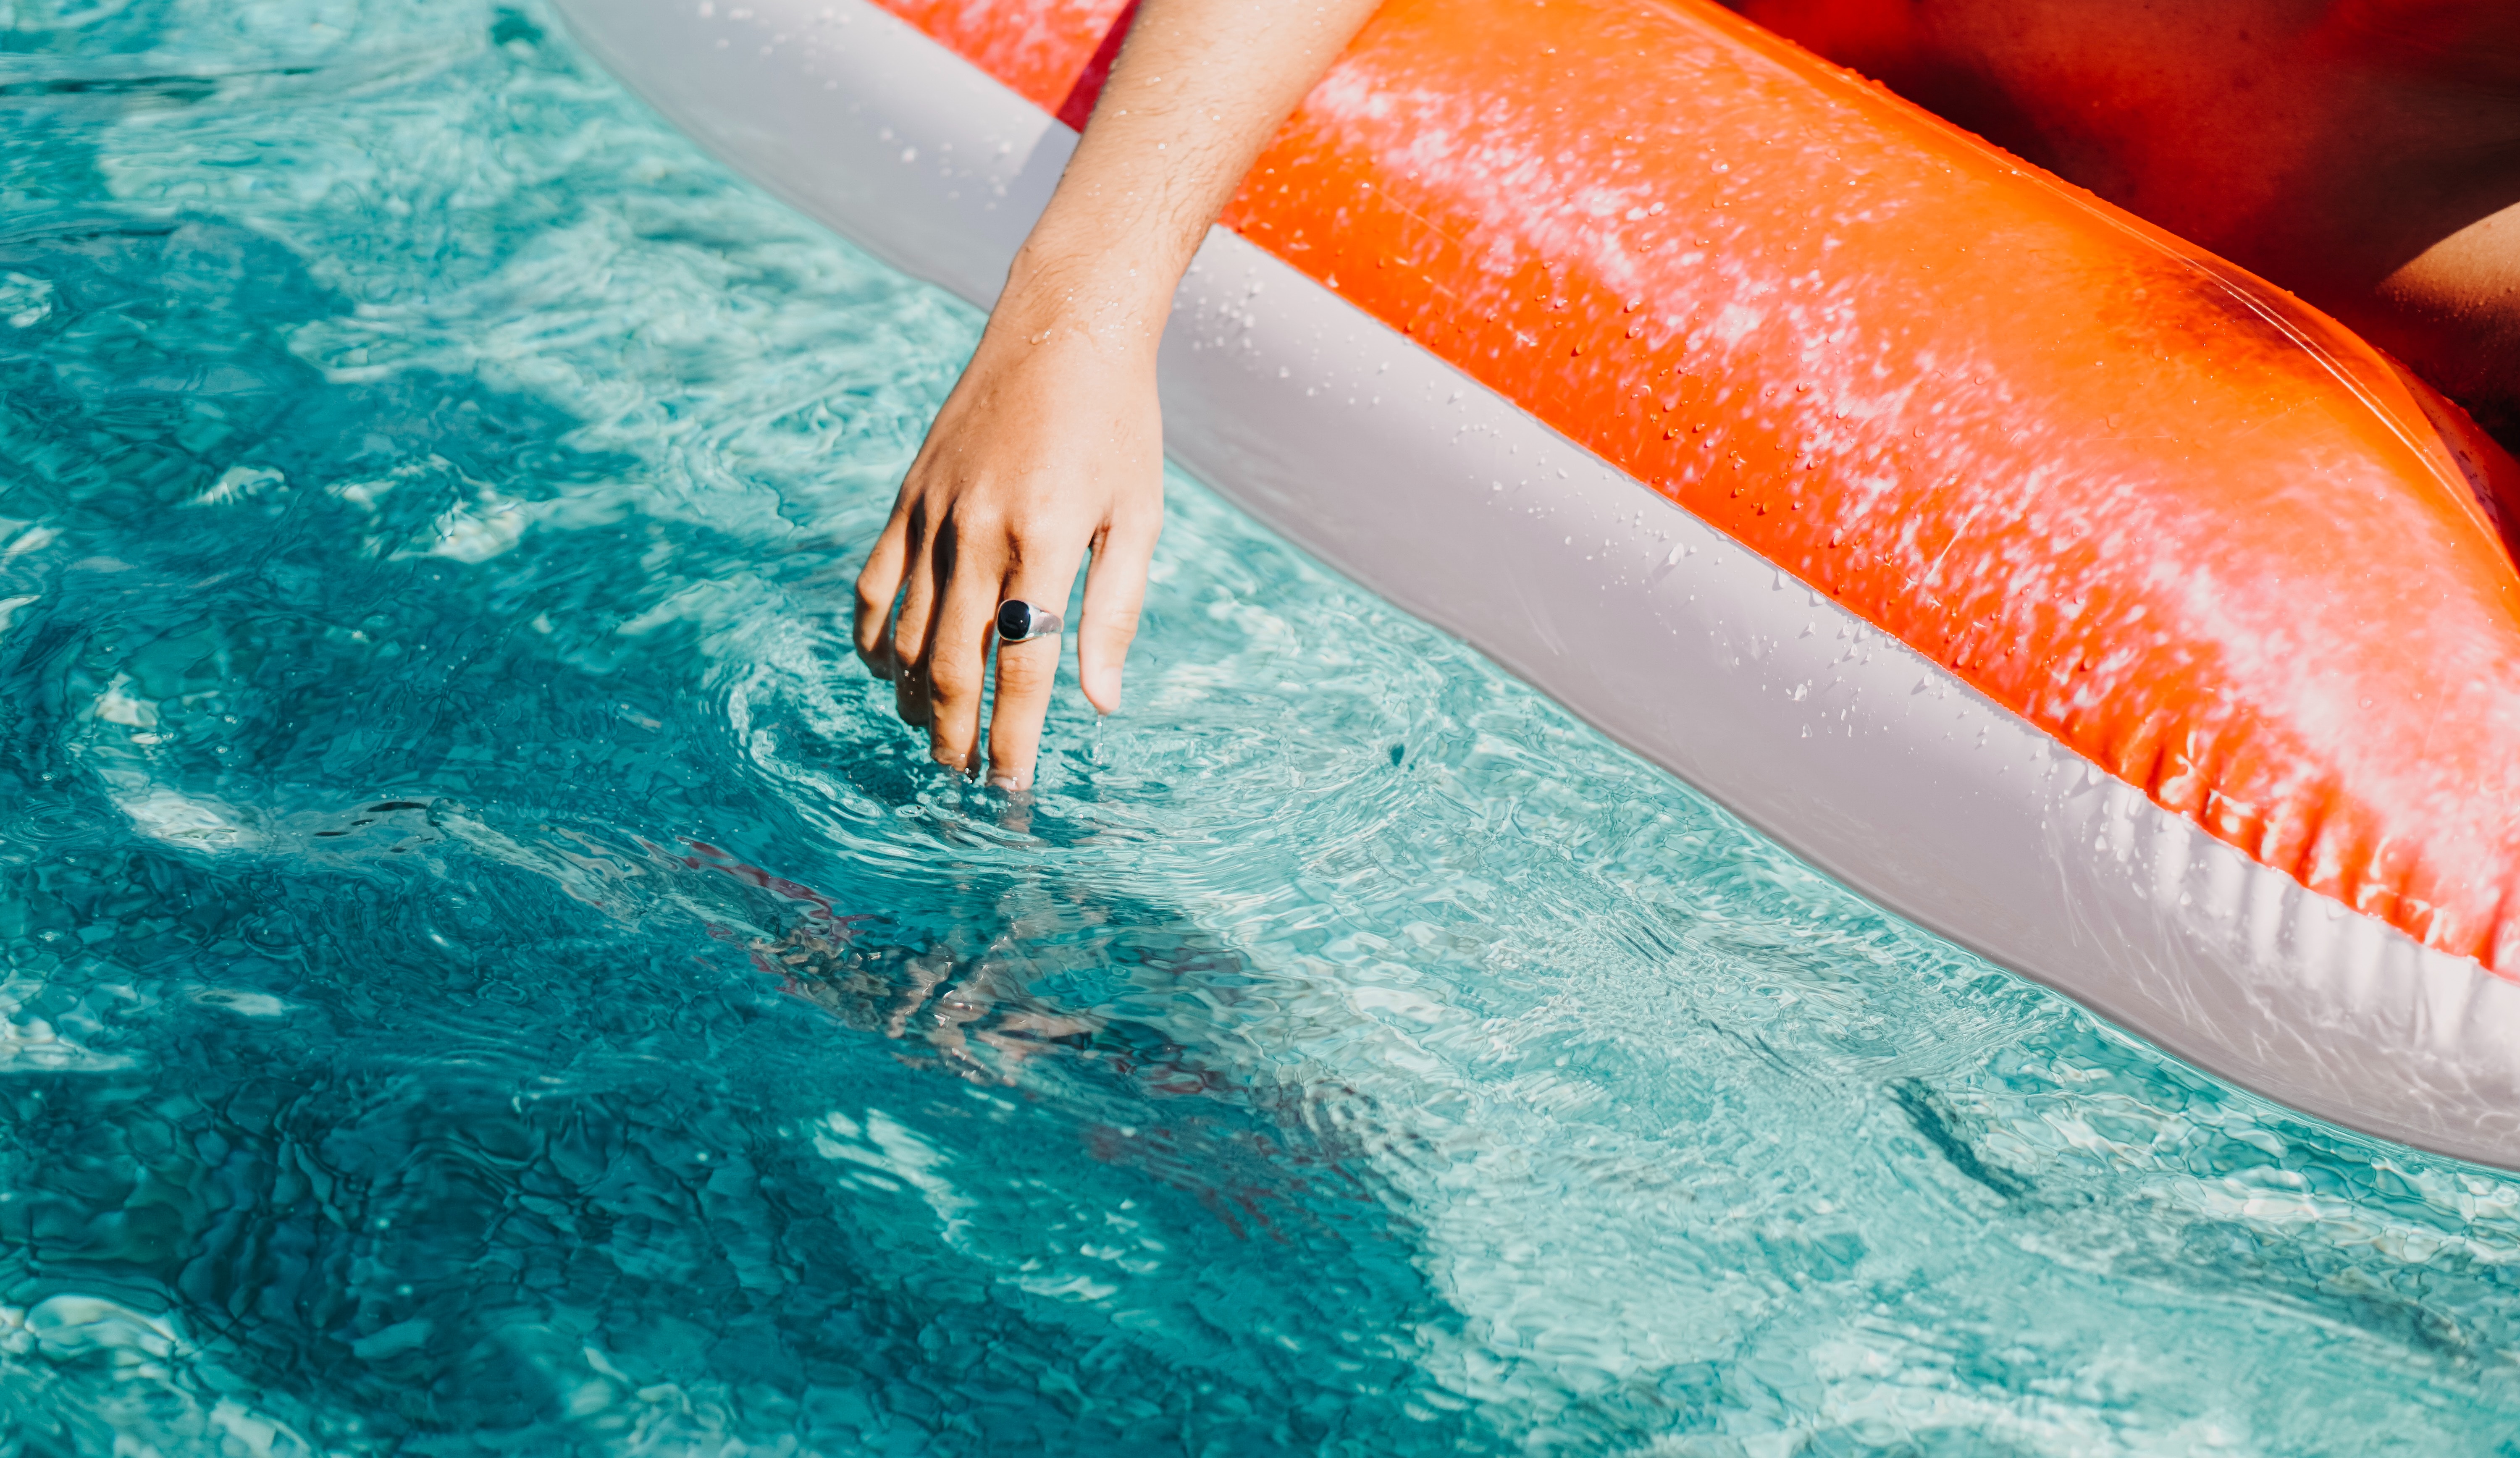 An individual peacefully floats in a pool, reclining on an inflatable raft, their hand gently caressing the water's surface